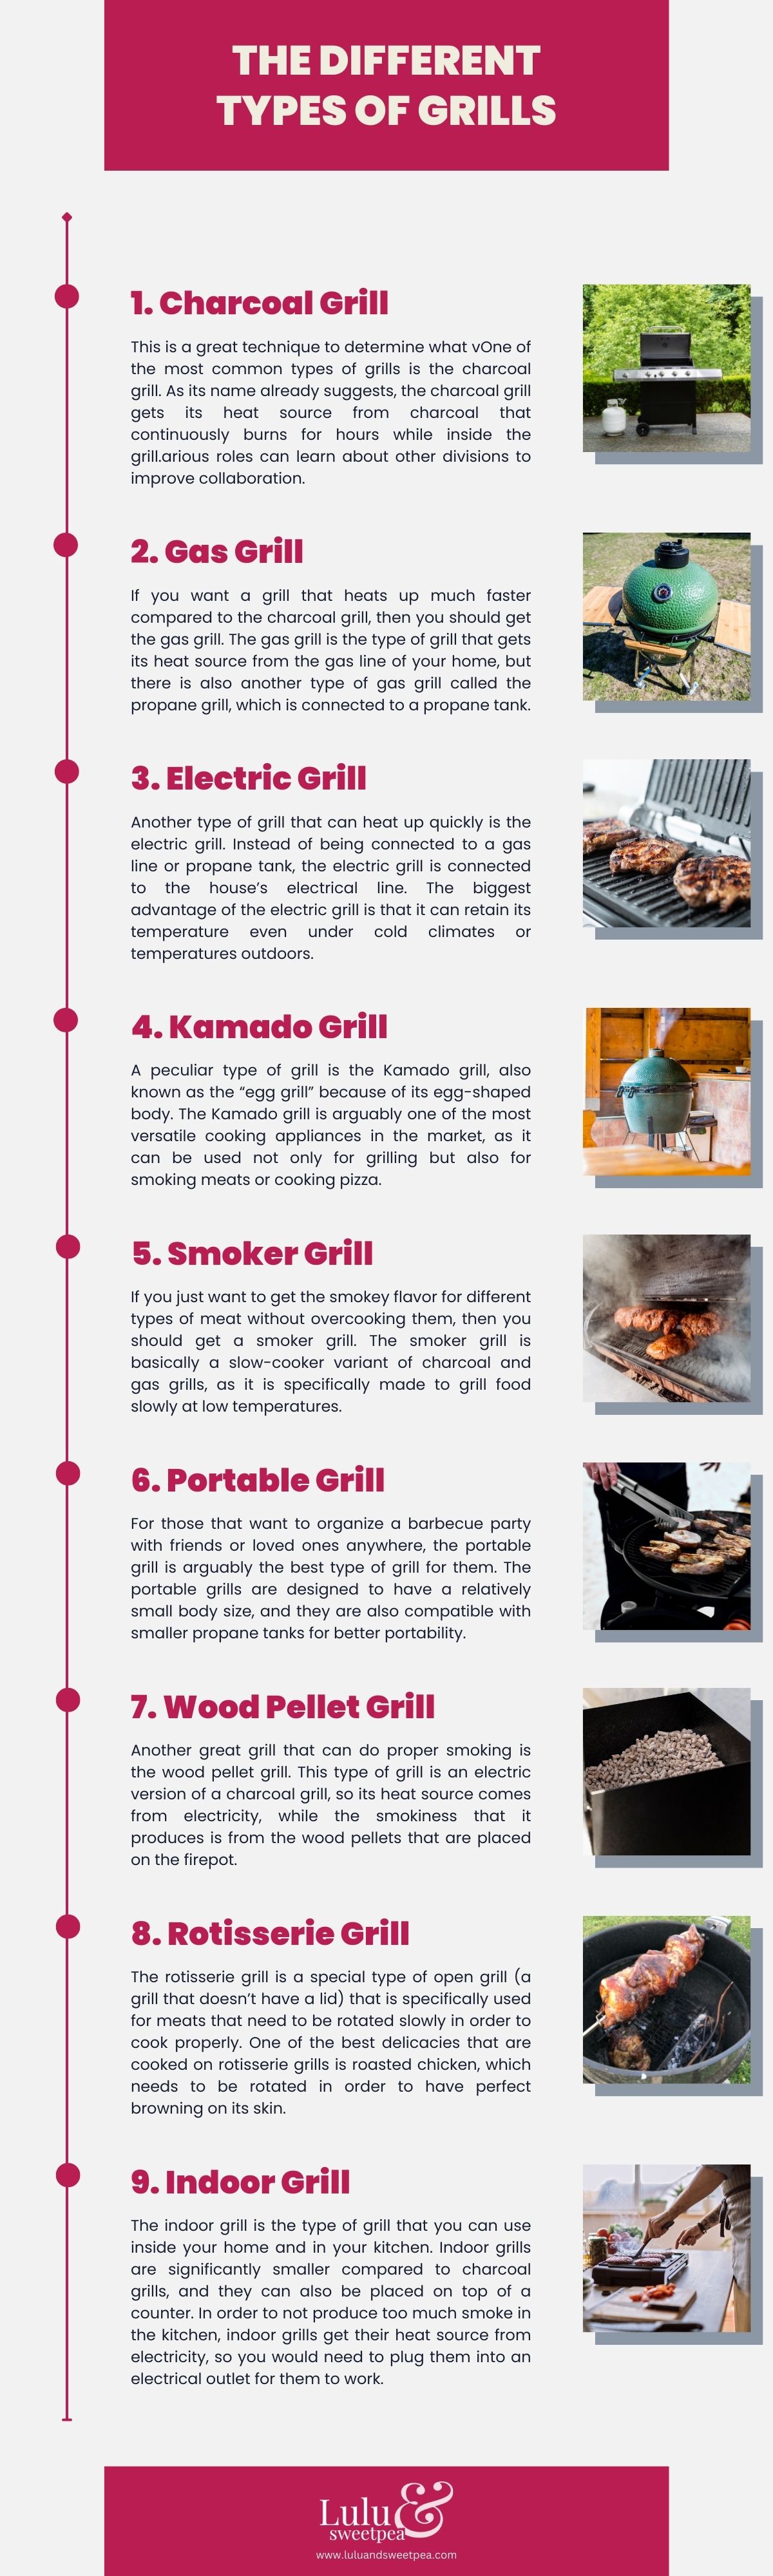 Other Types of Grills Other Than Offset Barrel Smokers